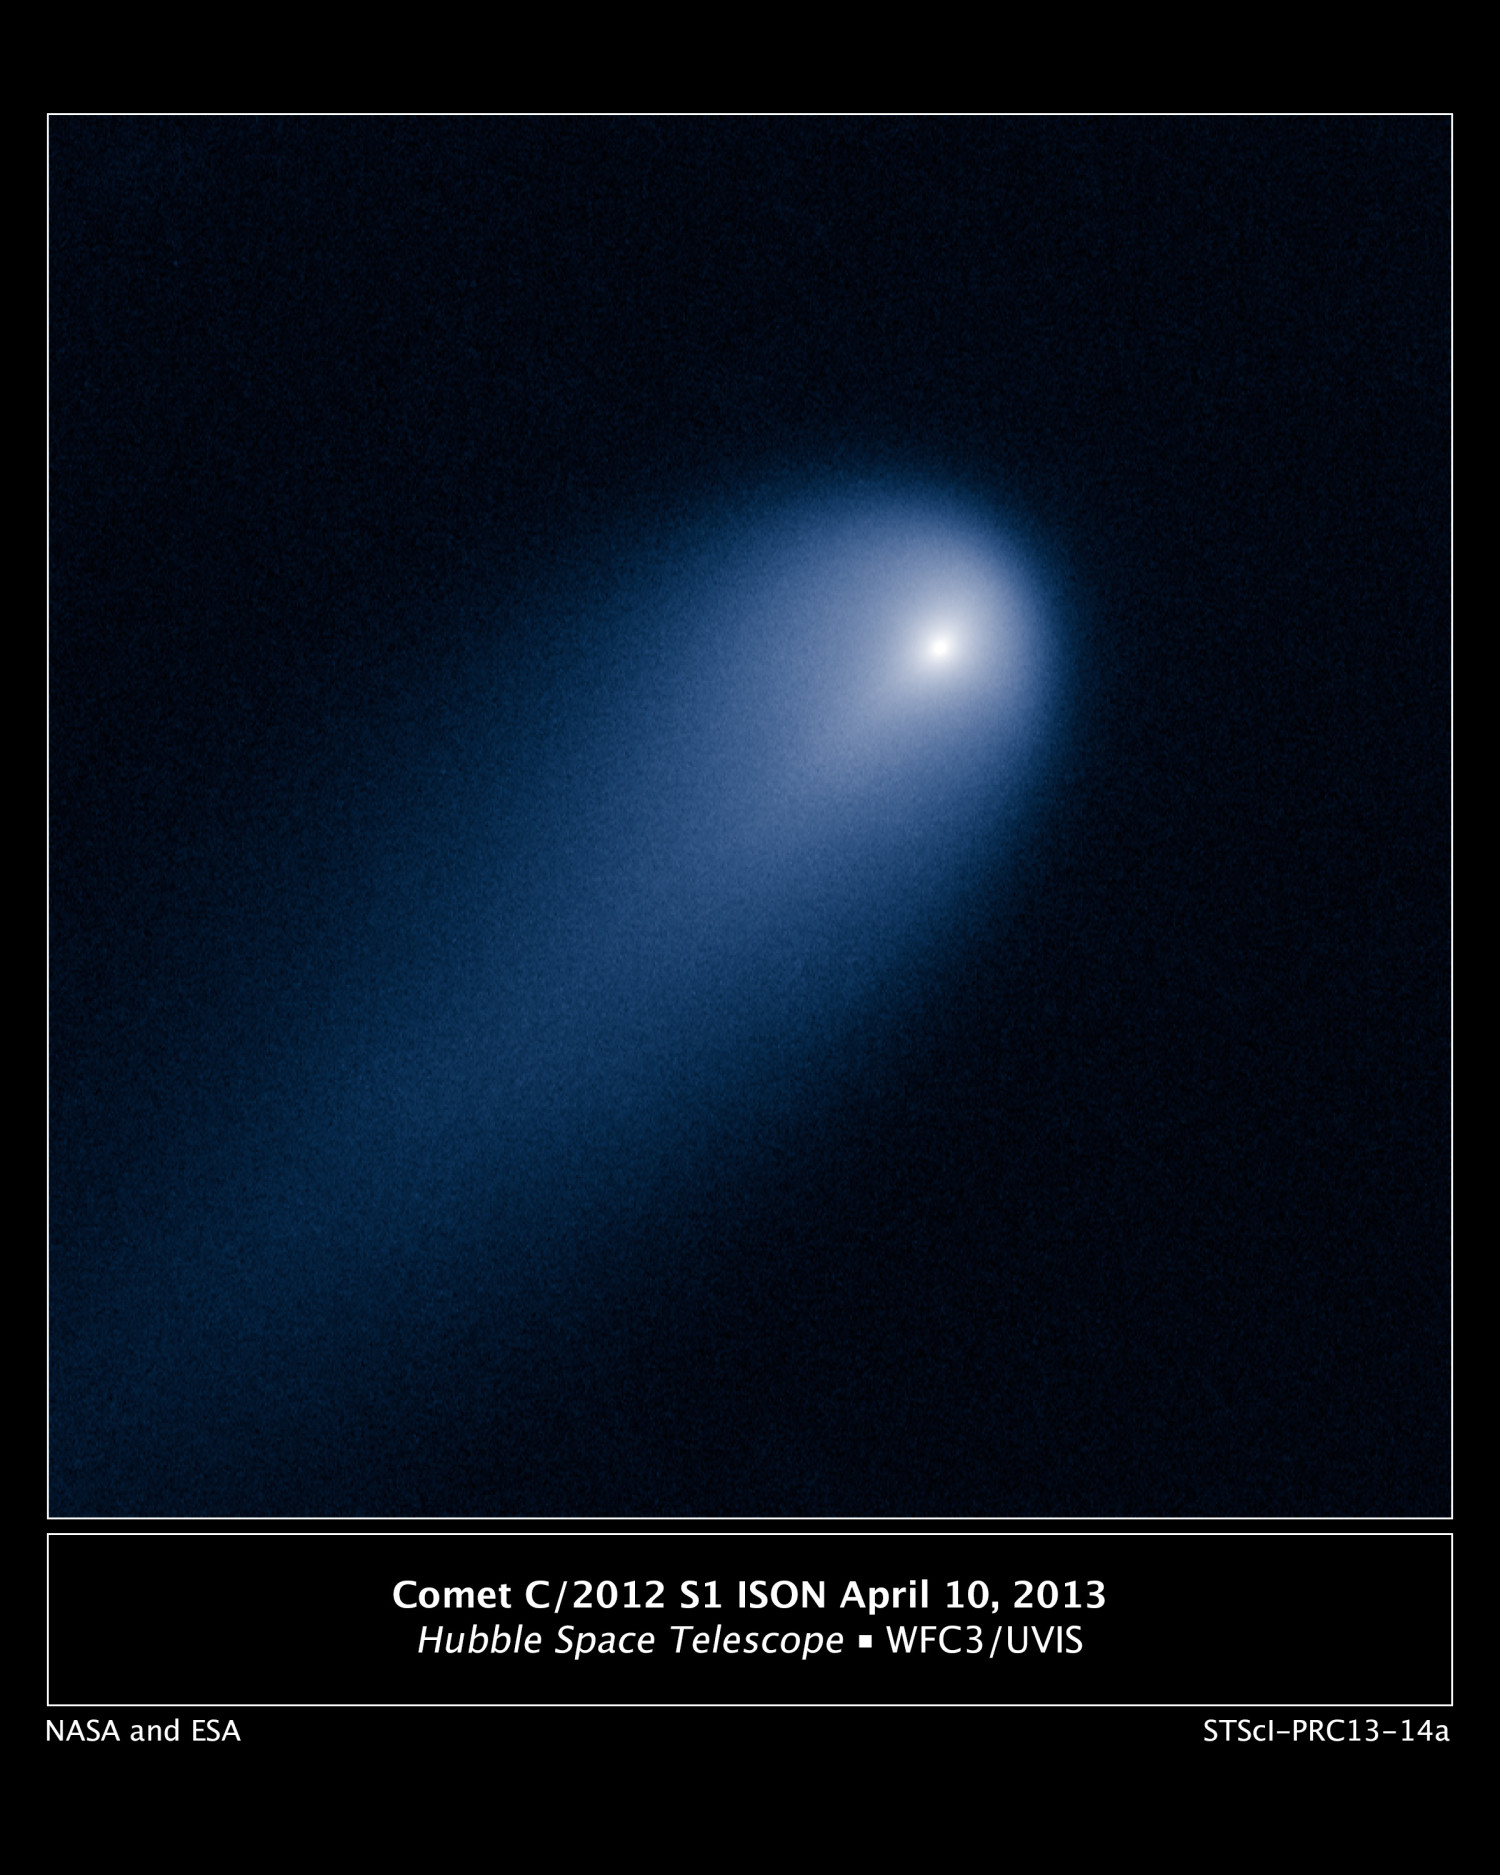 Comet C/ISON was imaged with the Hubble Space telescope on April 10 using the Wide Field Camera 3, when the comet was 394 million miles from Earth. View larger. Image via NASA, ESA, J.-Y. Li (Planetary Science Institute), and the Hubble Comet ISON Imaging Science Team